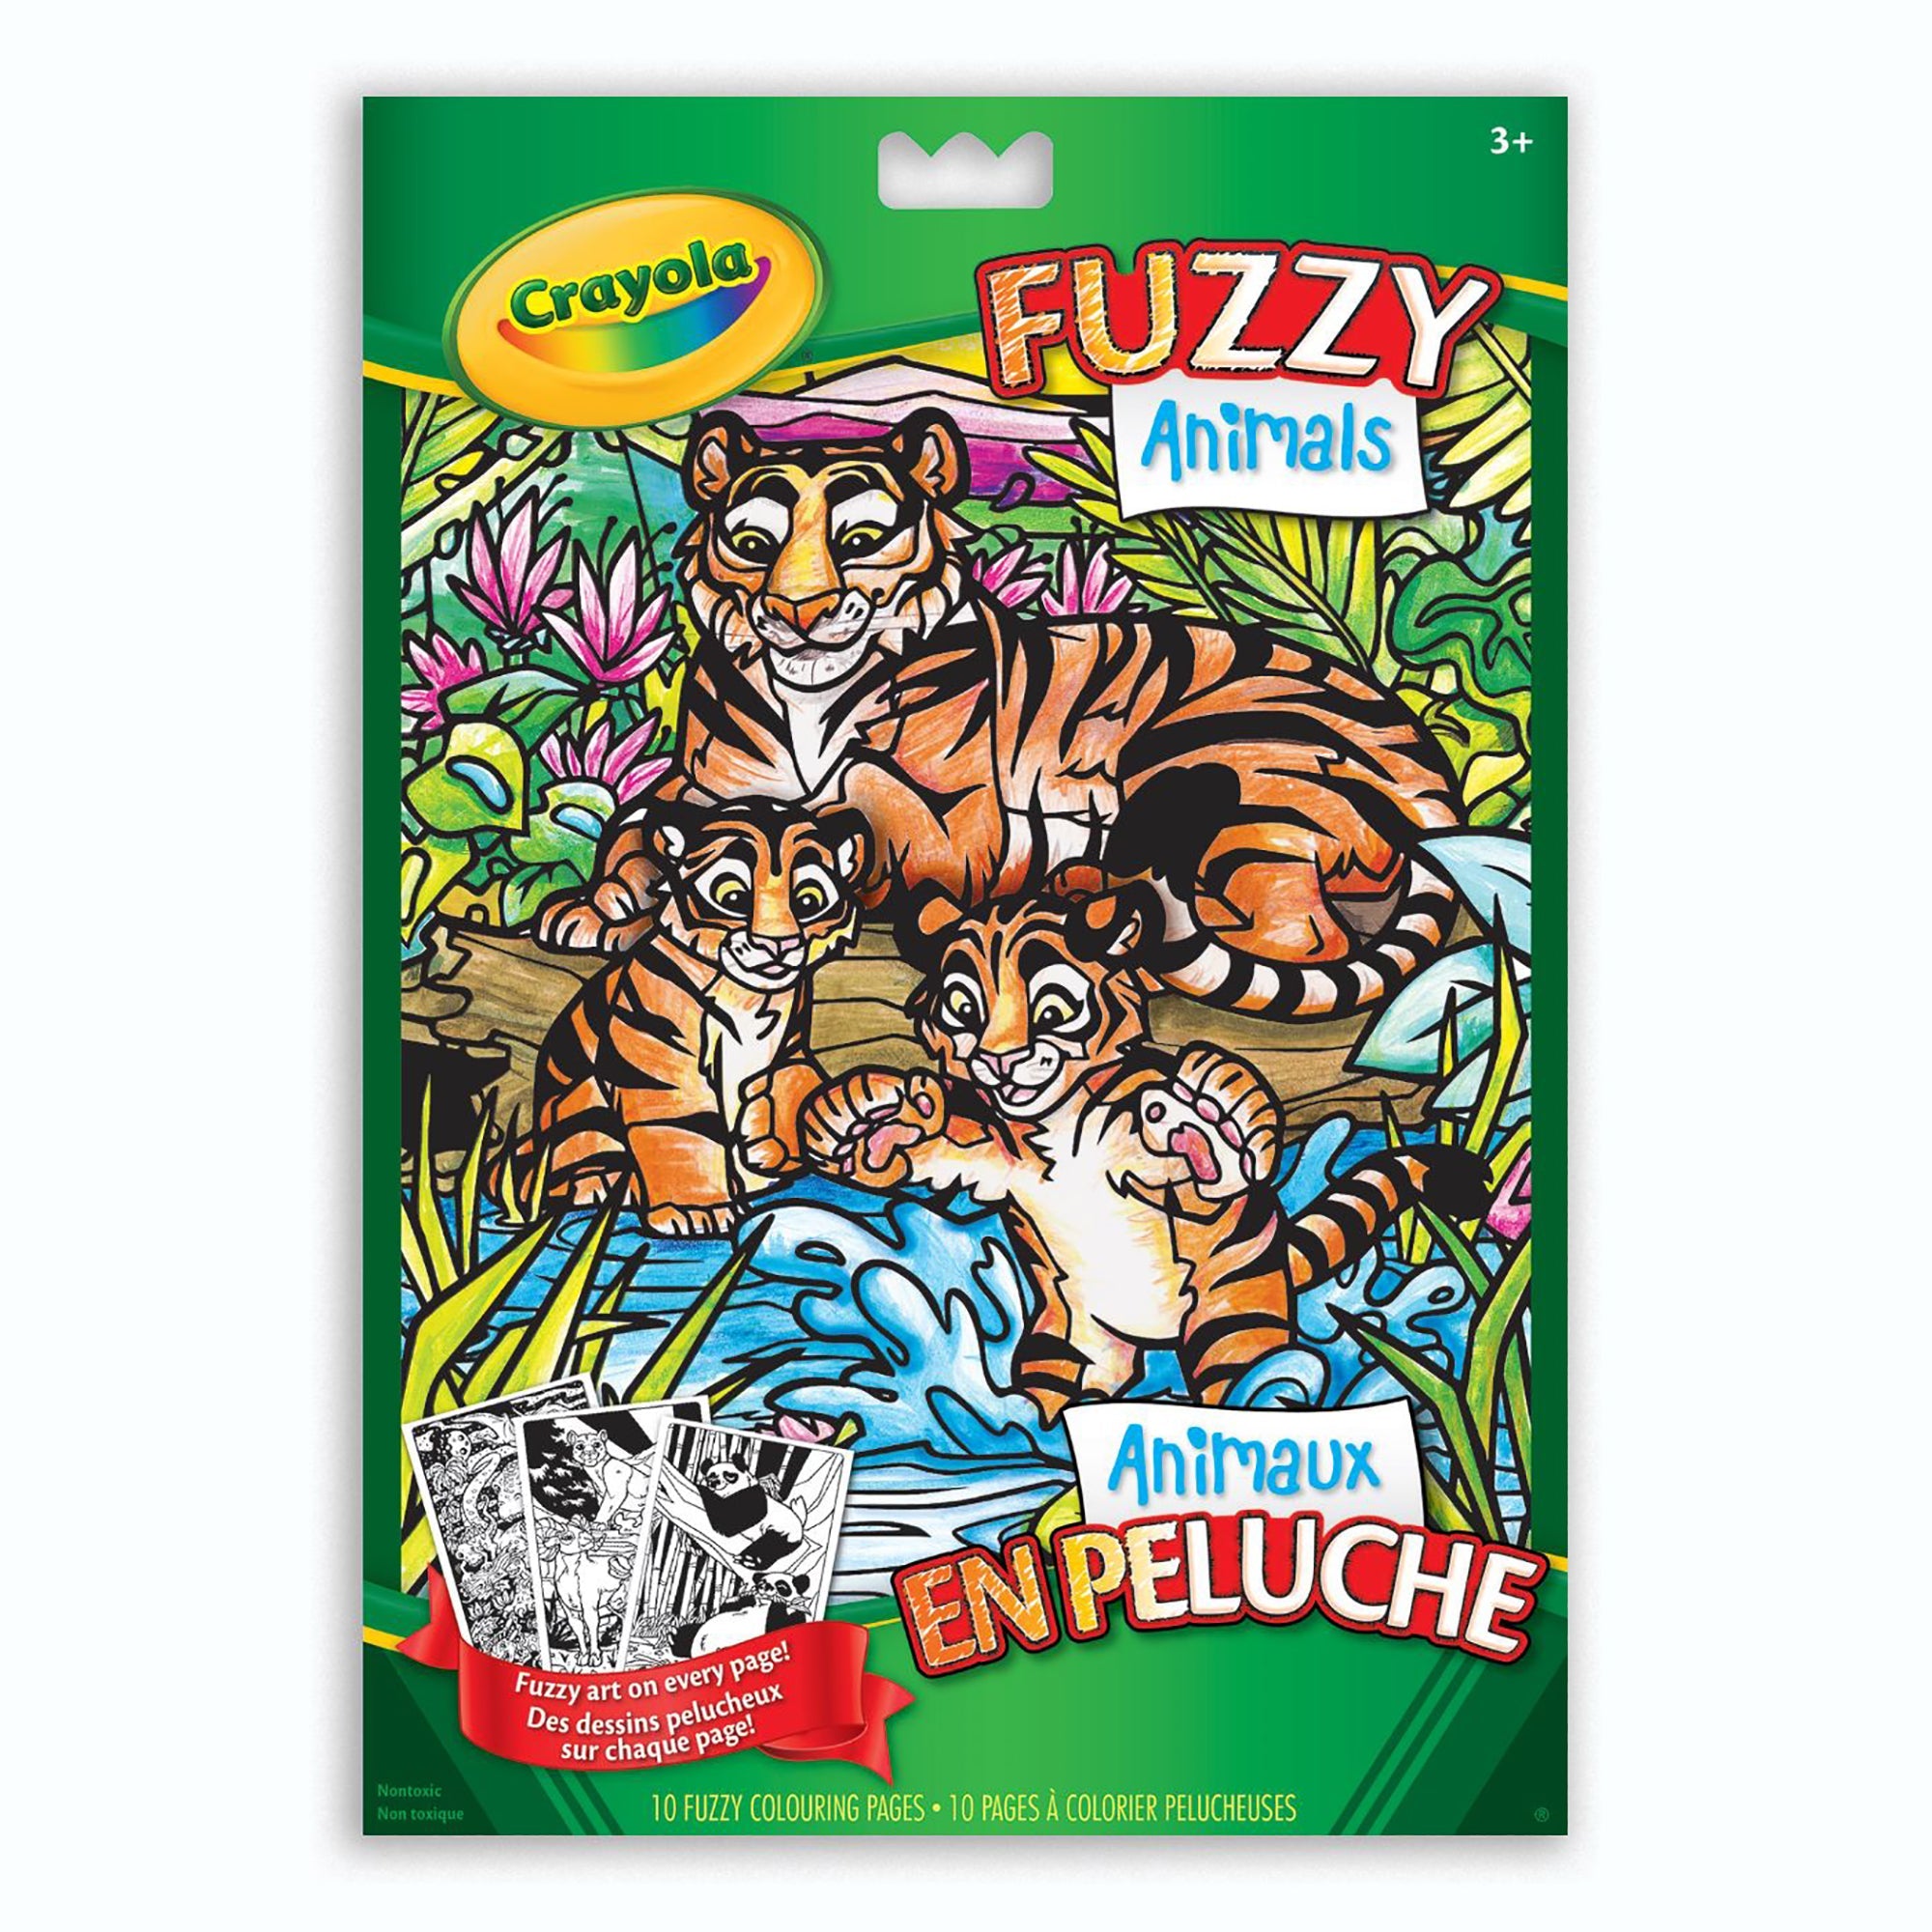 Crayola Fuzzy Animals Coloring Book - 10 Pages 8x11.5in